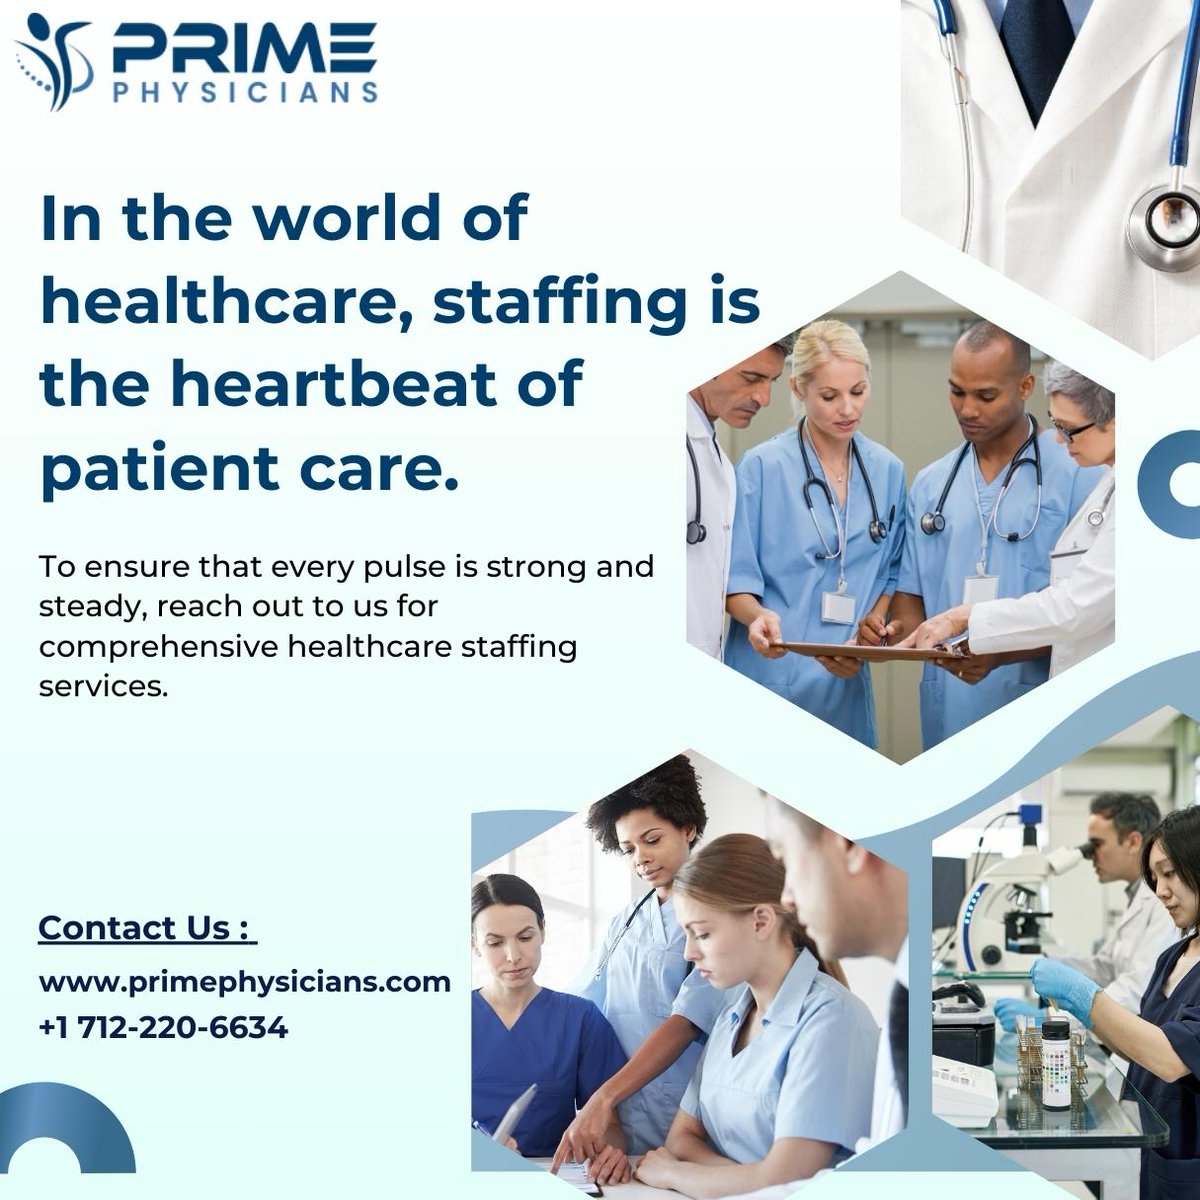 In the realm of healthcare, staffing is the heartbeat that keeps patient care strong and steady.

#HealthcareStaffing #PrimePhysicians #Patientcare #Healthcare #ITStaffing #Healthcarestaff #Healthcarestaffingusa #Healthcarestaffingsolutions #Healthcarestaffingsolution